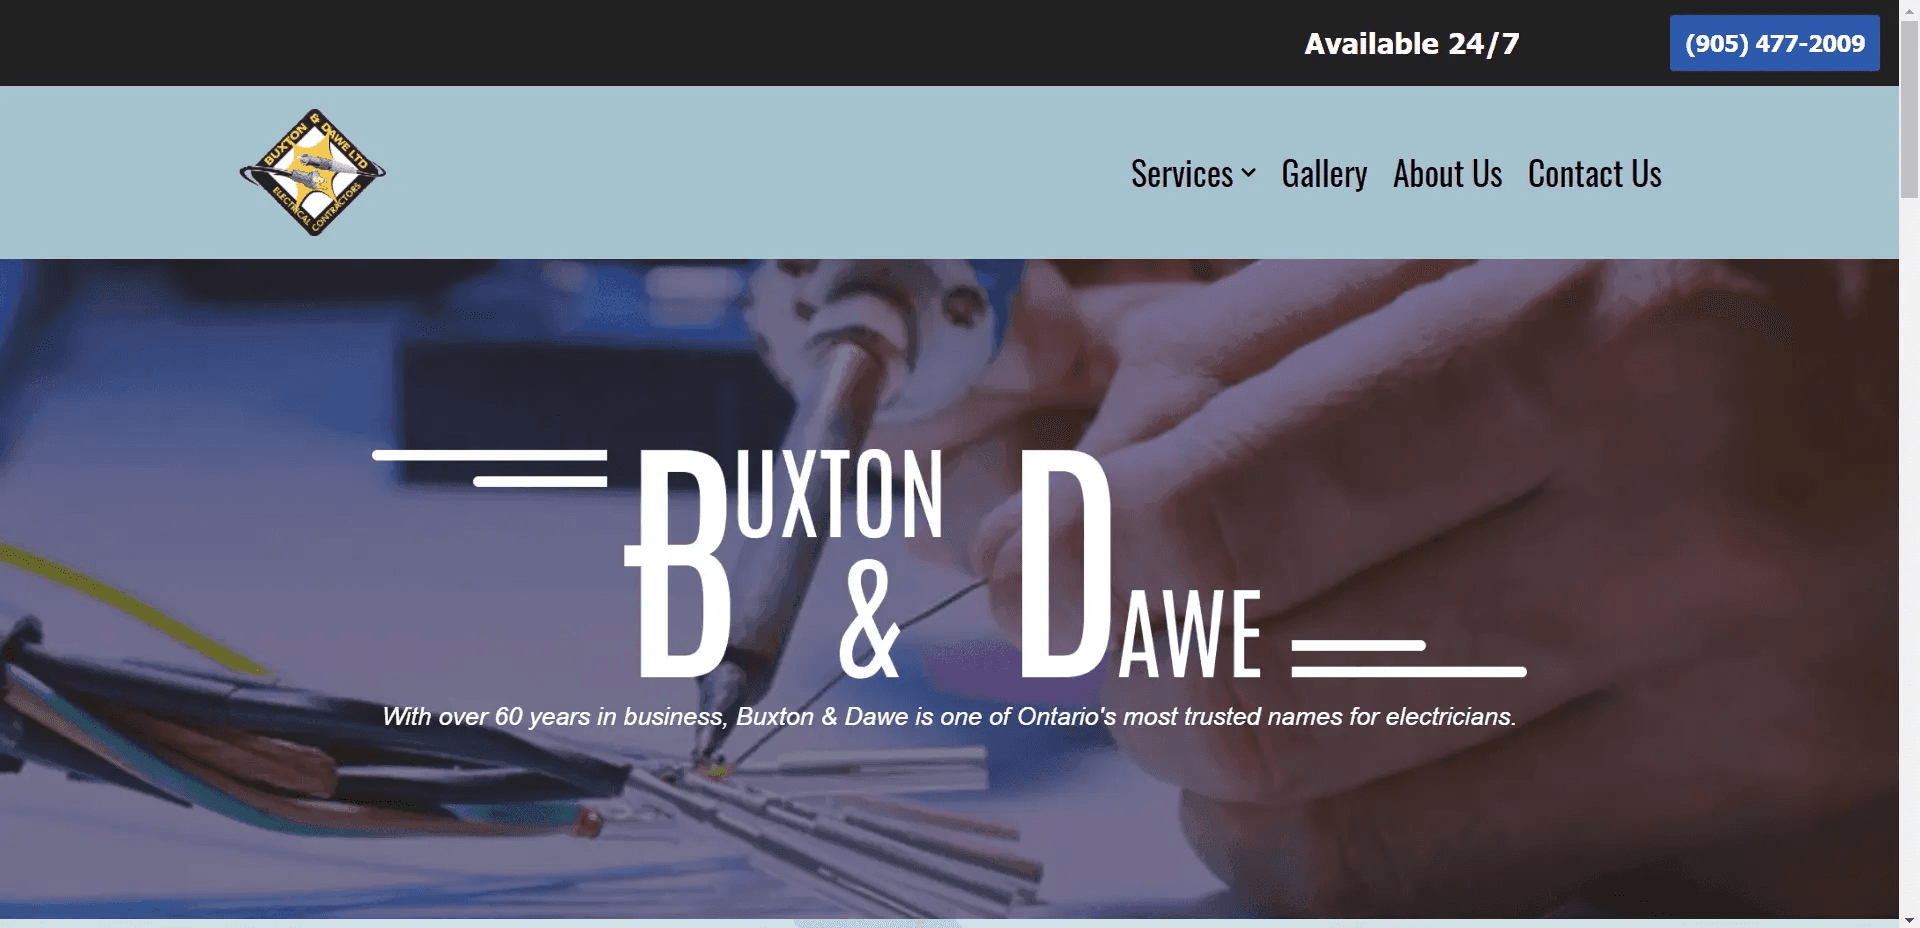 The full-page website 'hero' section. Buxton & Dawe's iconic logo is displayed over footage of electrical work